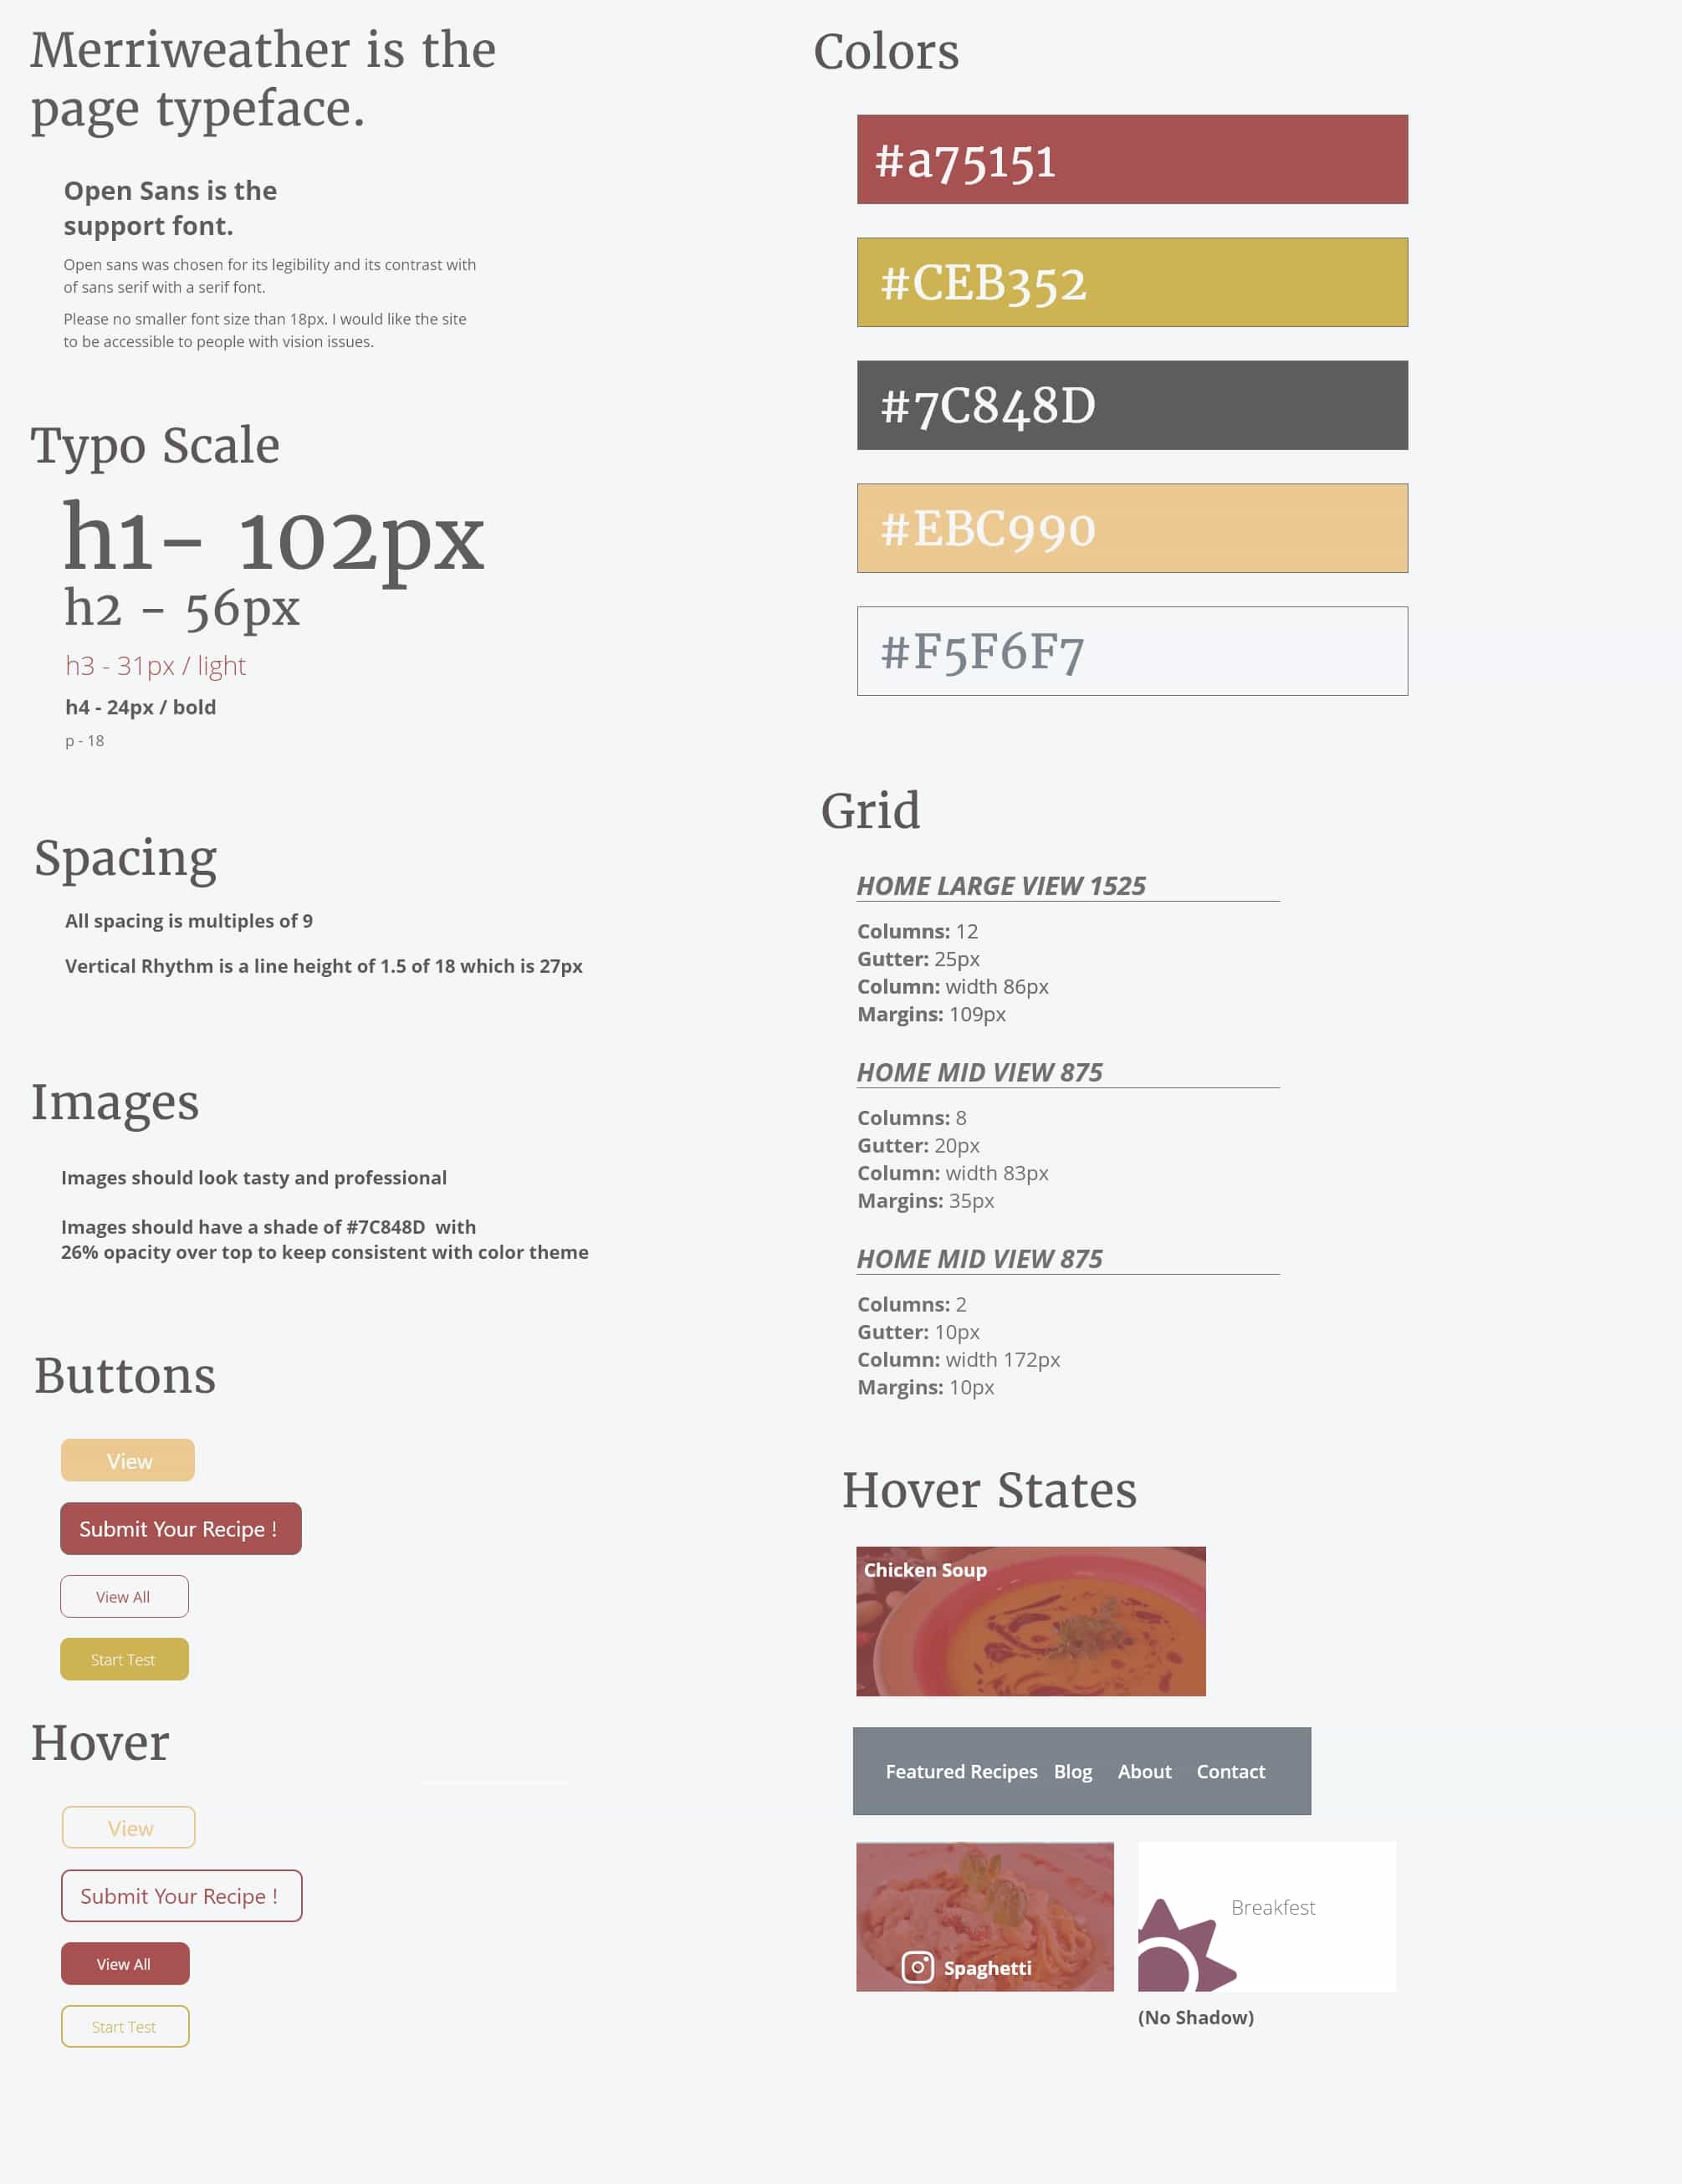 A mood board with styling rules of website. contains, yellow, red, gray and white. Fancy fonts for text. Font sized are detailed like h1 is 105px.